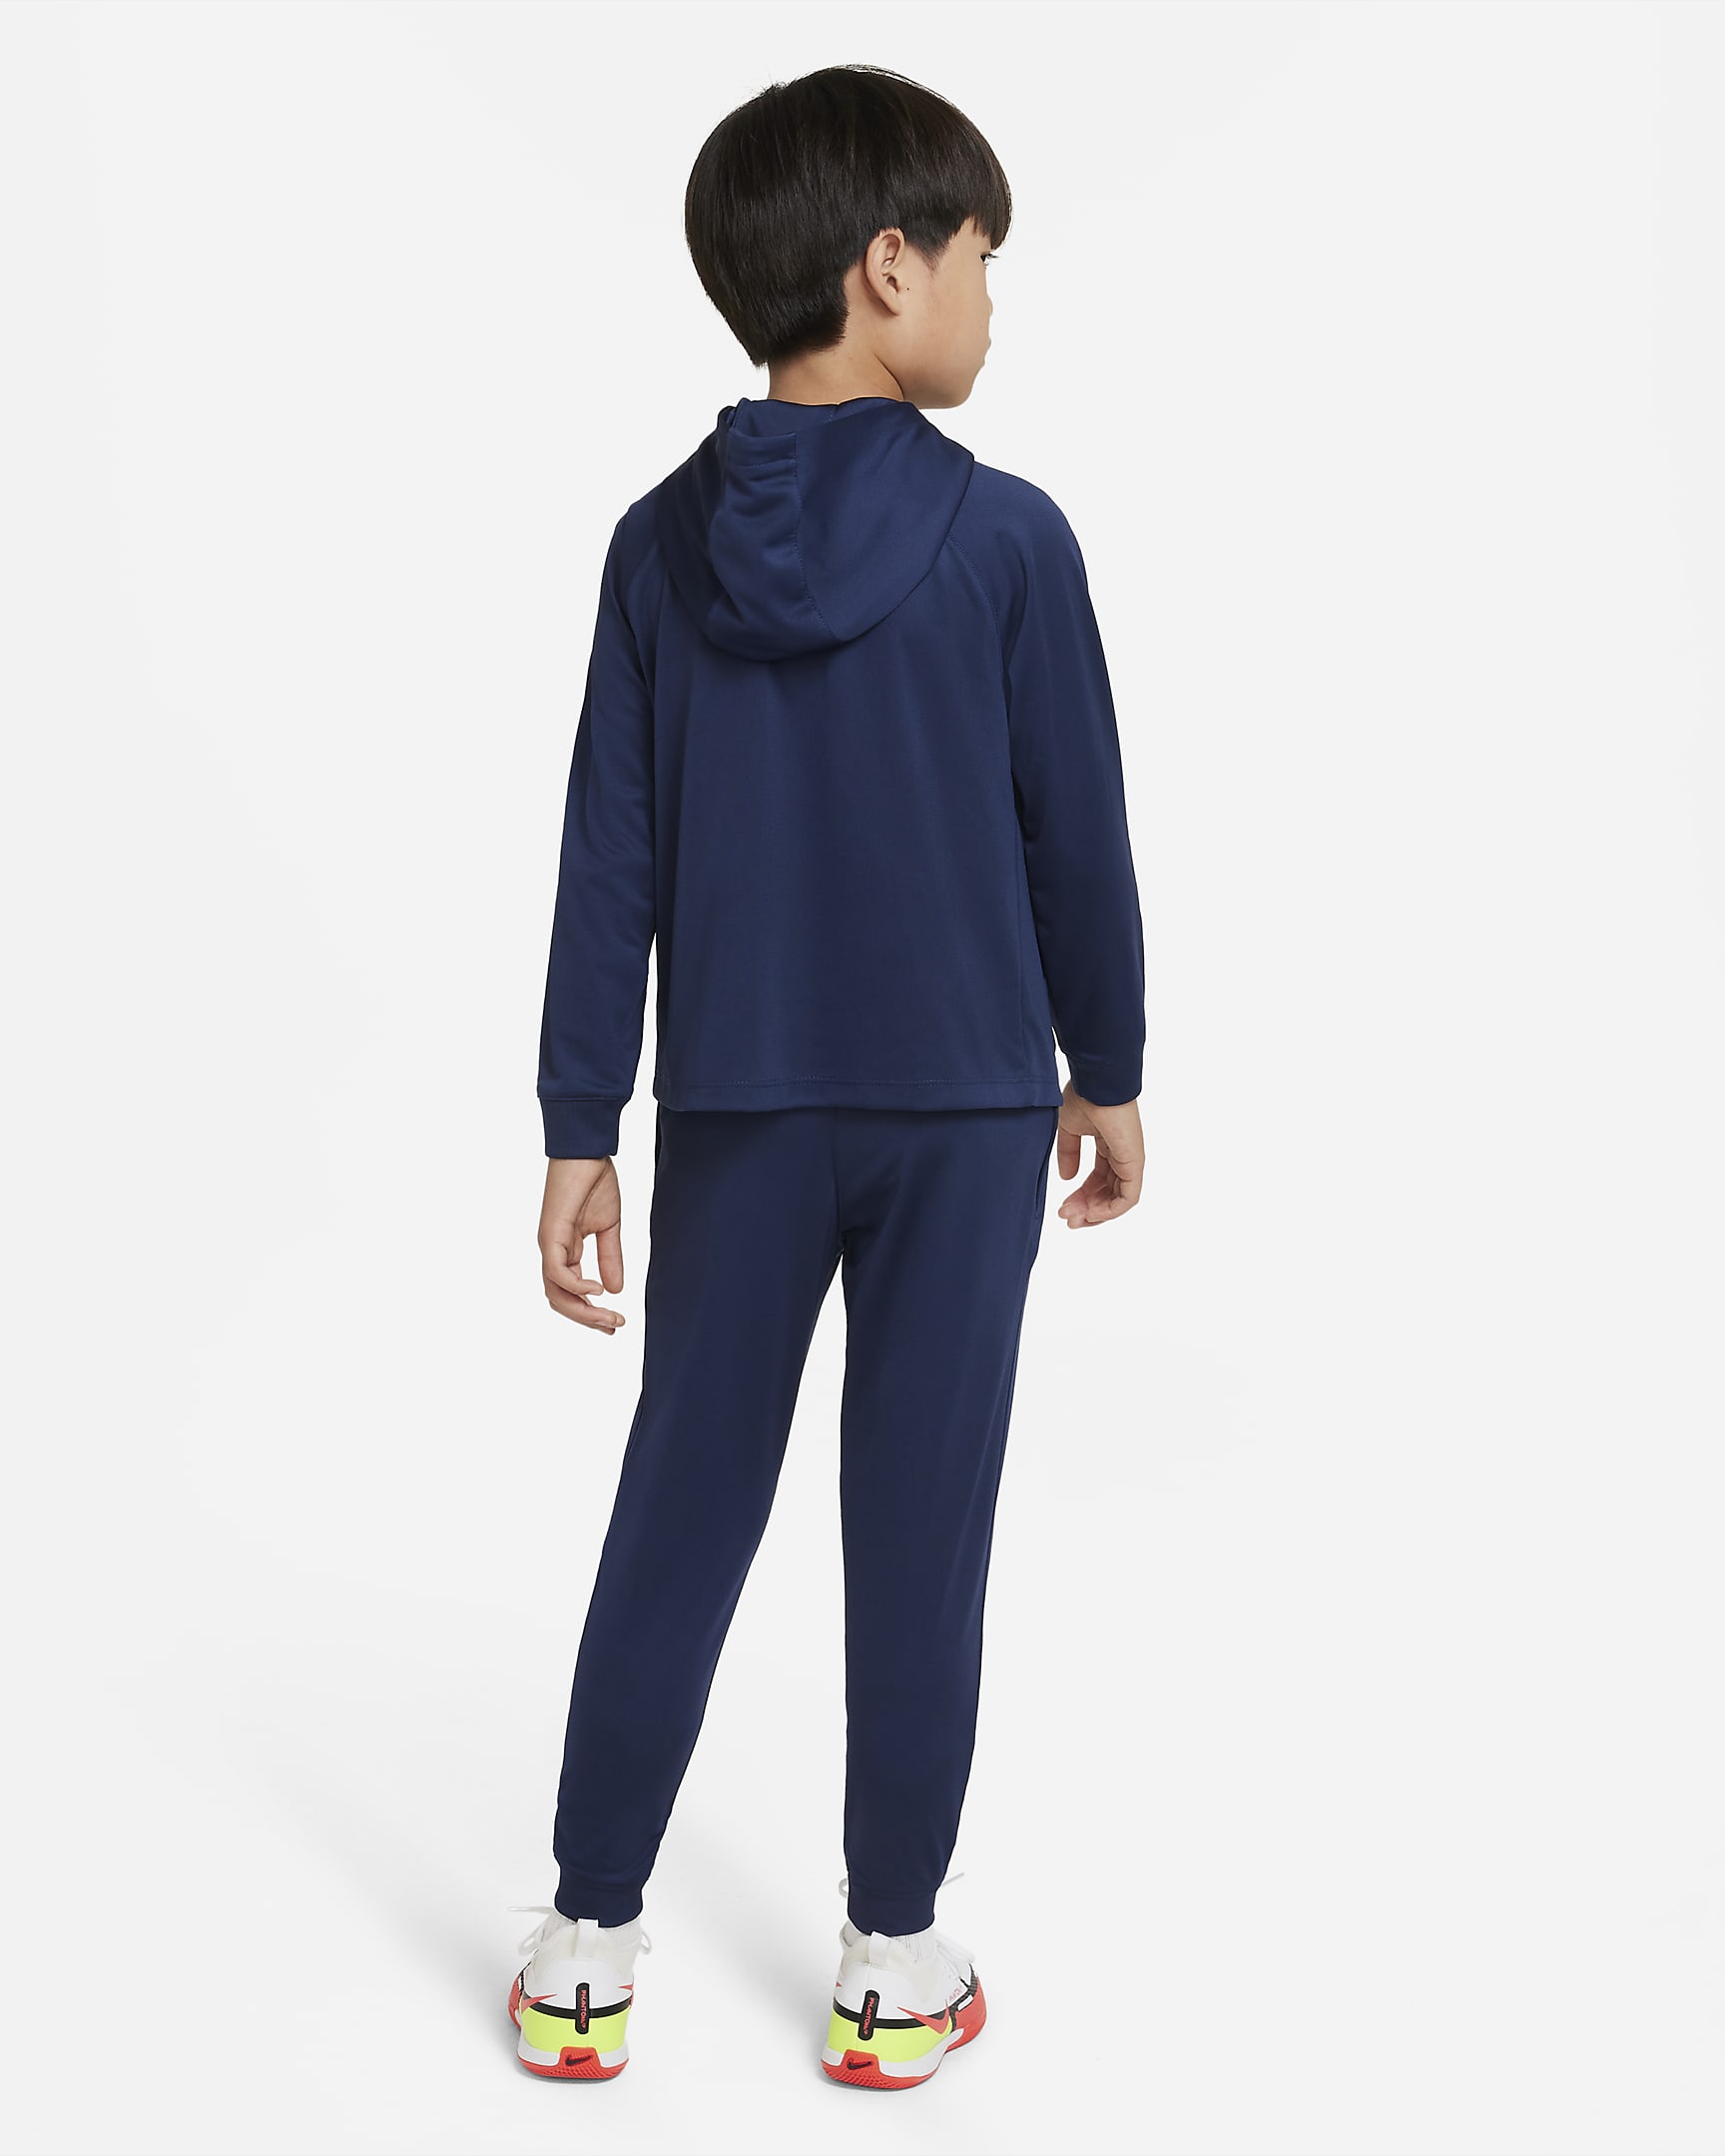 FFF Strike Younger Kids' Nike Dri-FIT Hooded Football Tracksuit. Nike BE